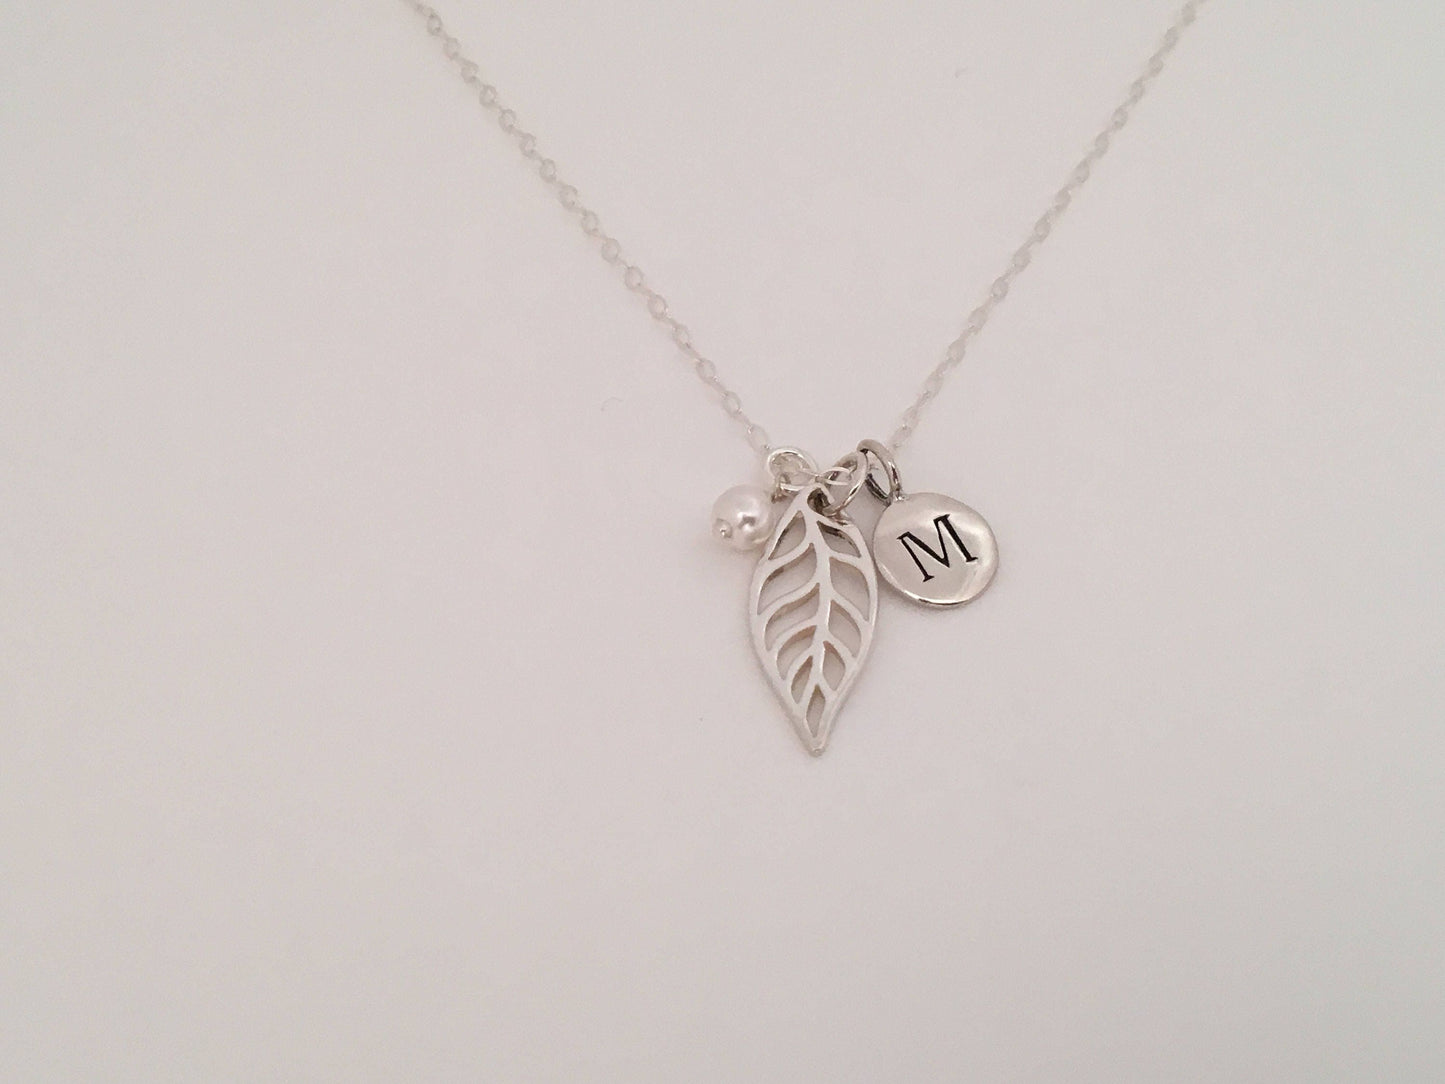 Personalized Sterling silver Leaf necklace, modern jewelry, dainty necklace, leaf charm necklace, leaf pendant jewelry, contemporary designs